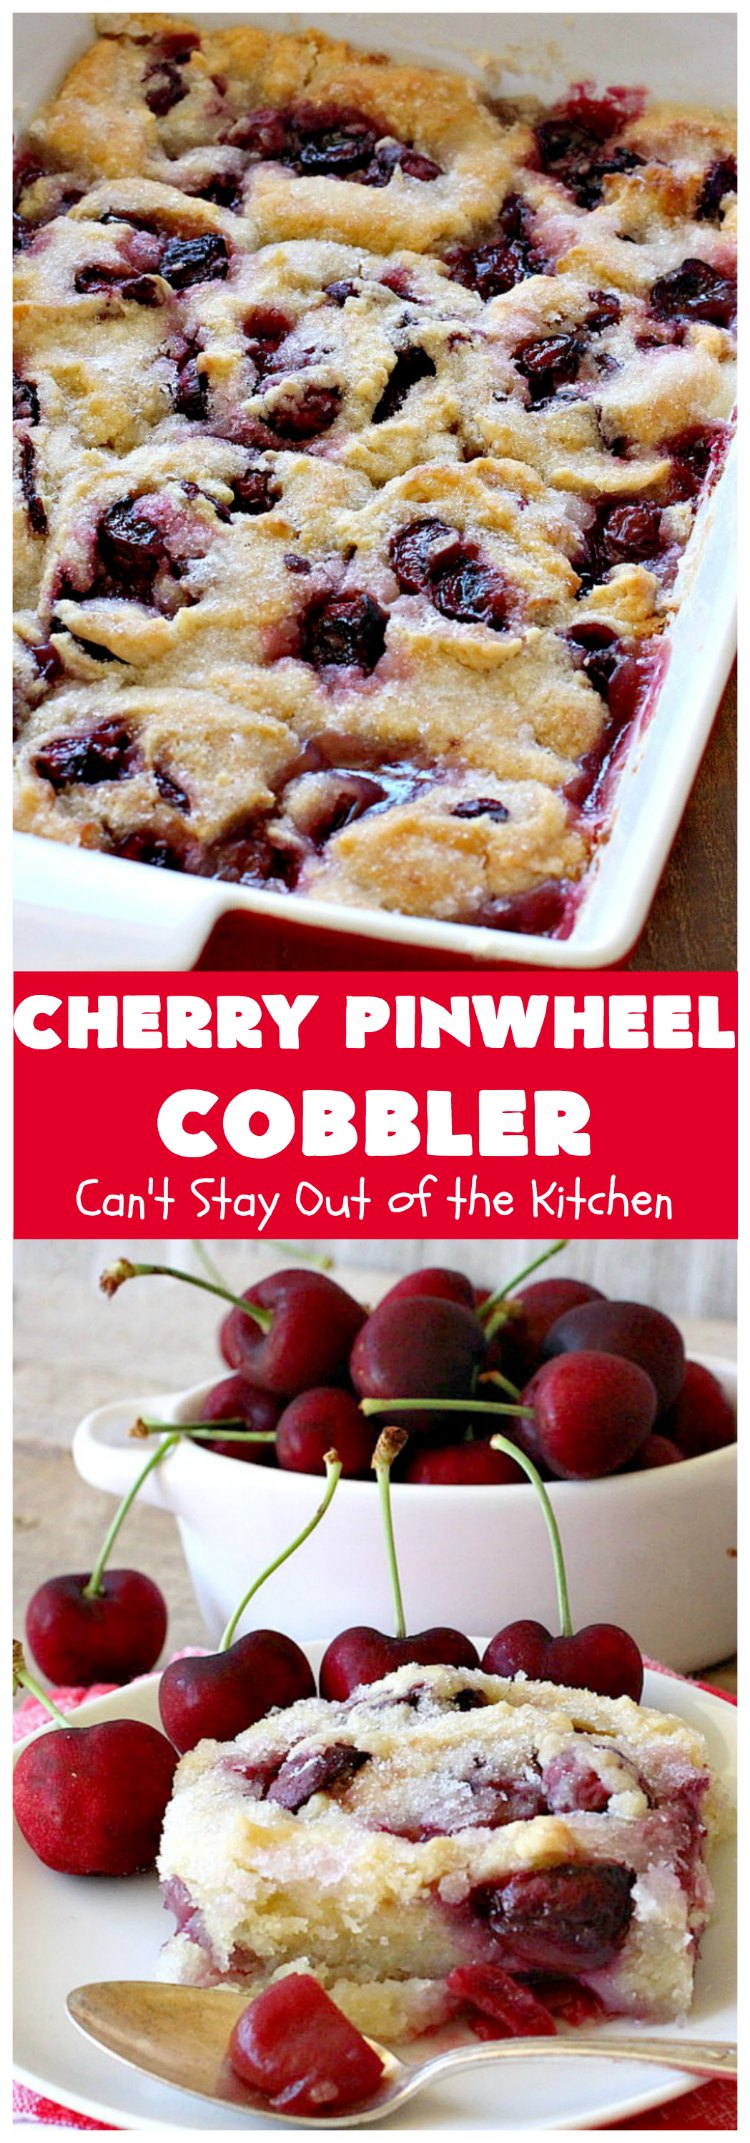 Cherry Pinwheel Cobbler | Can't Stay Out of the Kitchen | this awesome #dessert  rolls up #almond flavored #cherries in #PieCrust. A syrup is poured over top before baking. Terrific #CherryDessert while #FreshCherries are in season. #cobbler #CherryCobbler #CherryPinwheelCobbler #Summer #SummerDessert #NorthwestCherryGrowers #NWCherries #Canbassador 